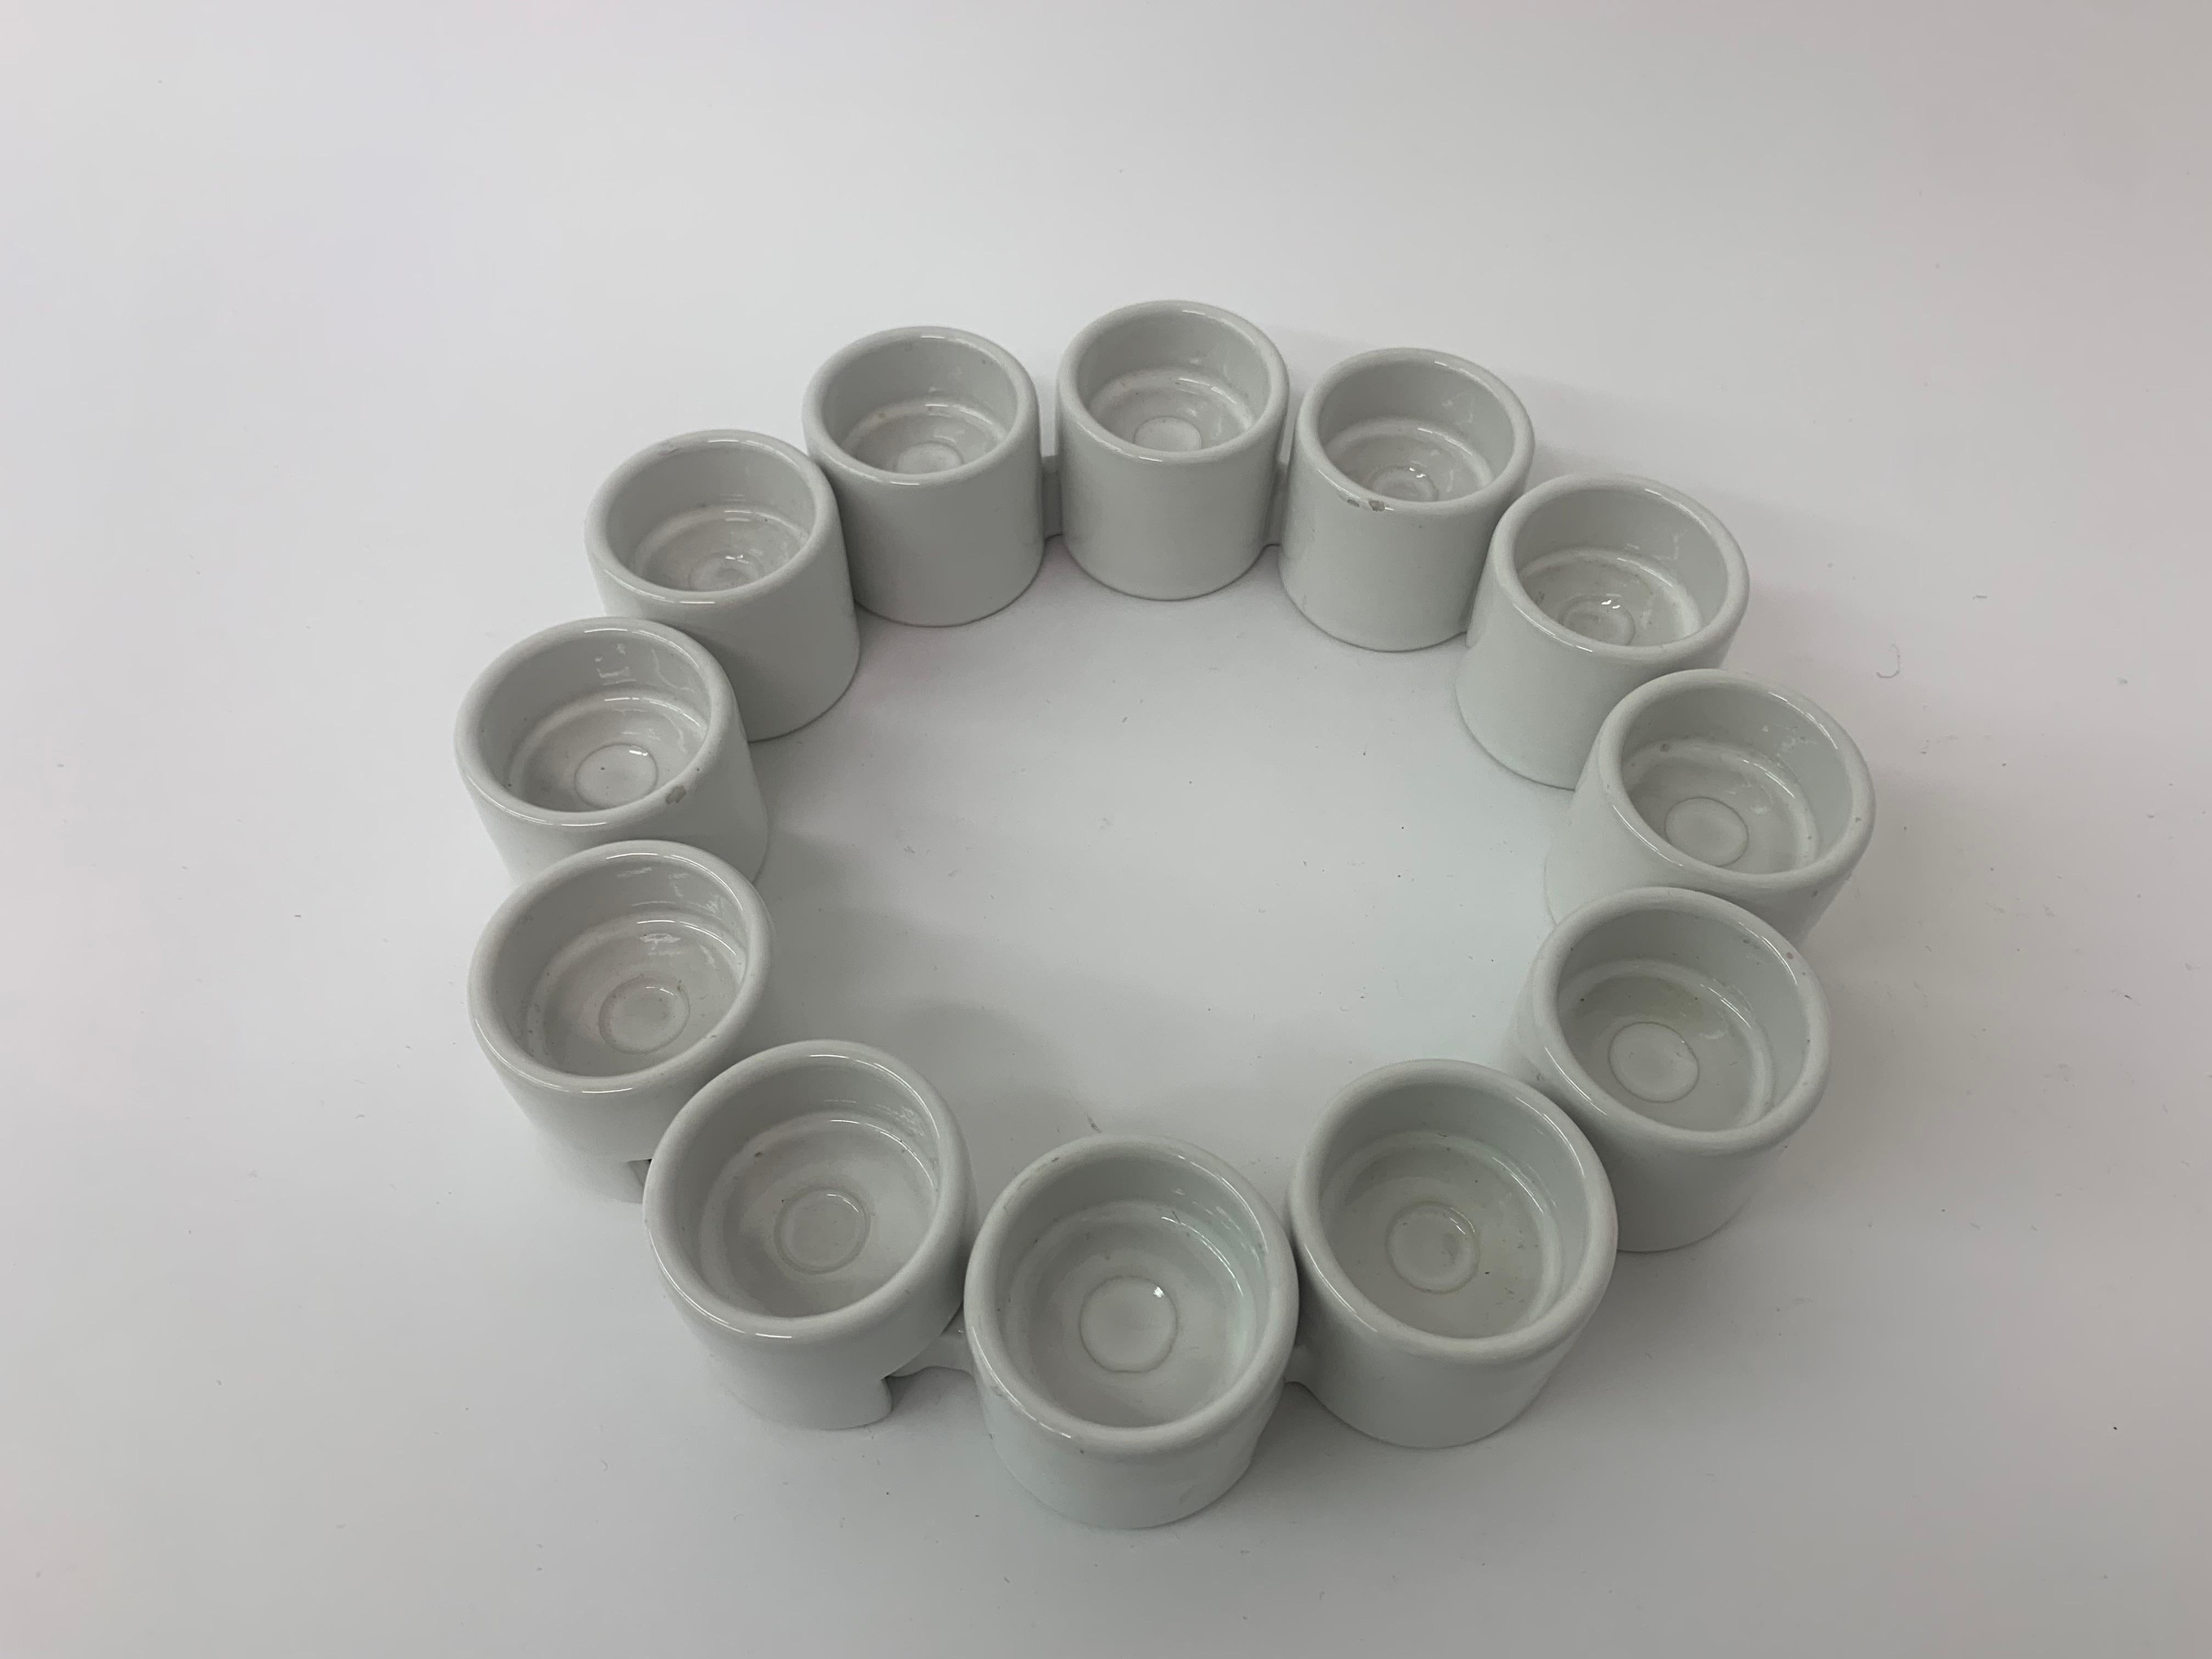 Vintage Ikea Candle Holder by Ehlen Johansson, 1980's For Sale 1